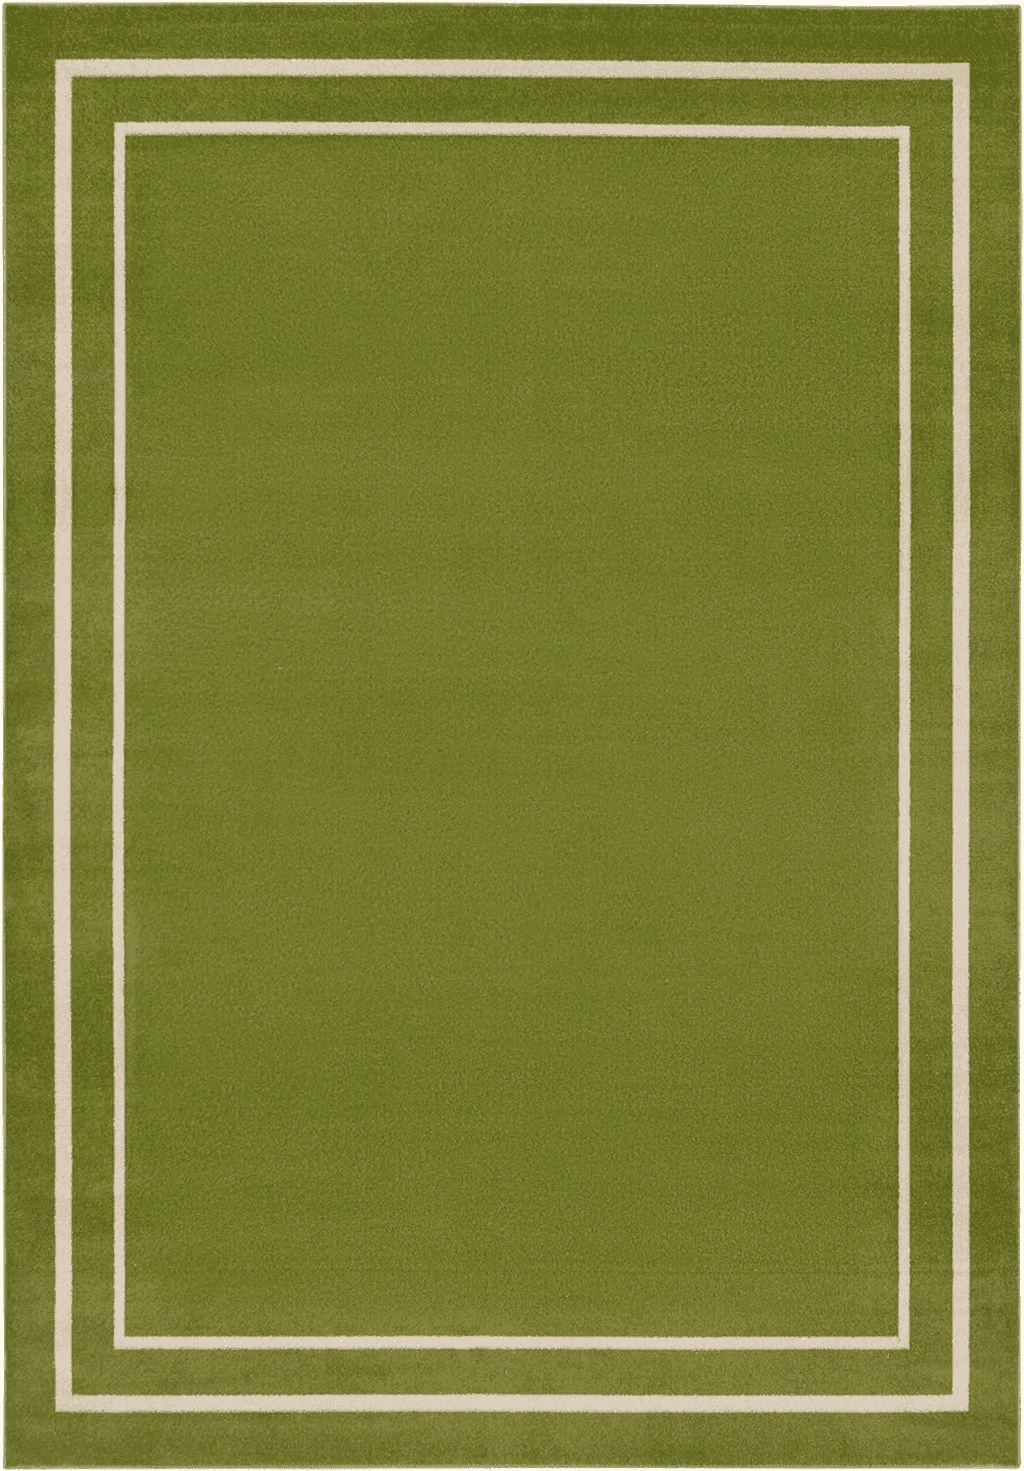 Nourison Essentials Indoor/Outdoor Solid Bordered Green Ivory 8' x 10' Area Rug, Easy Cleaning, Non Shedding, Bed Room, Living Room, Dining Room, Backyard, Deck, Patio (8x10)